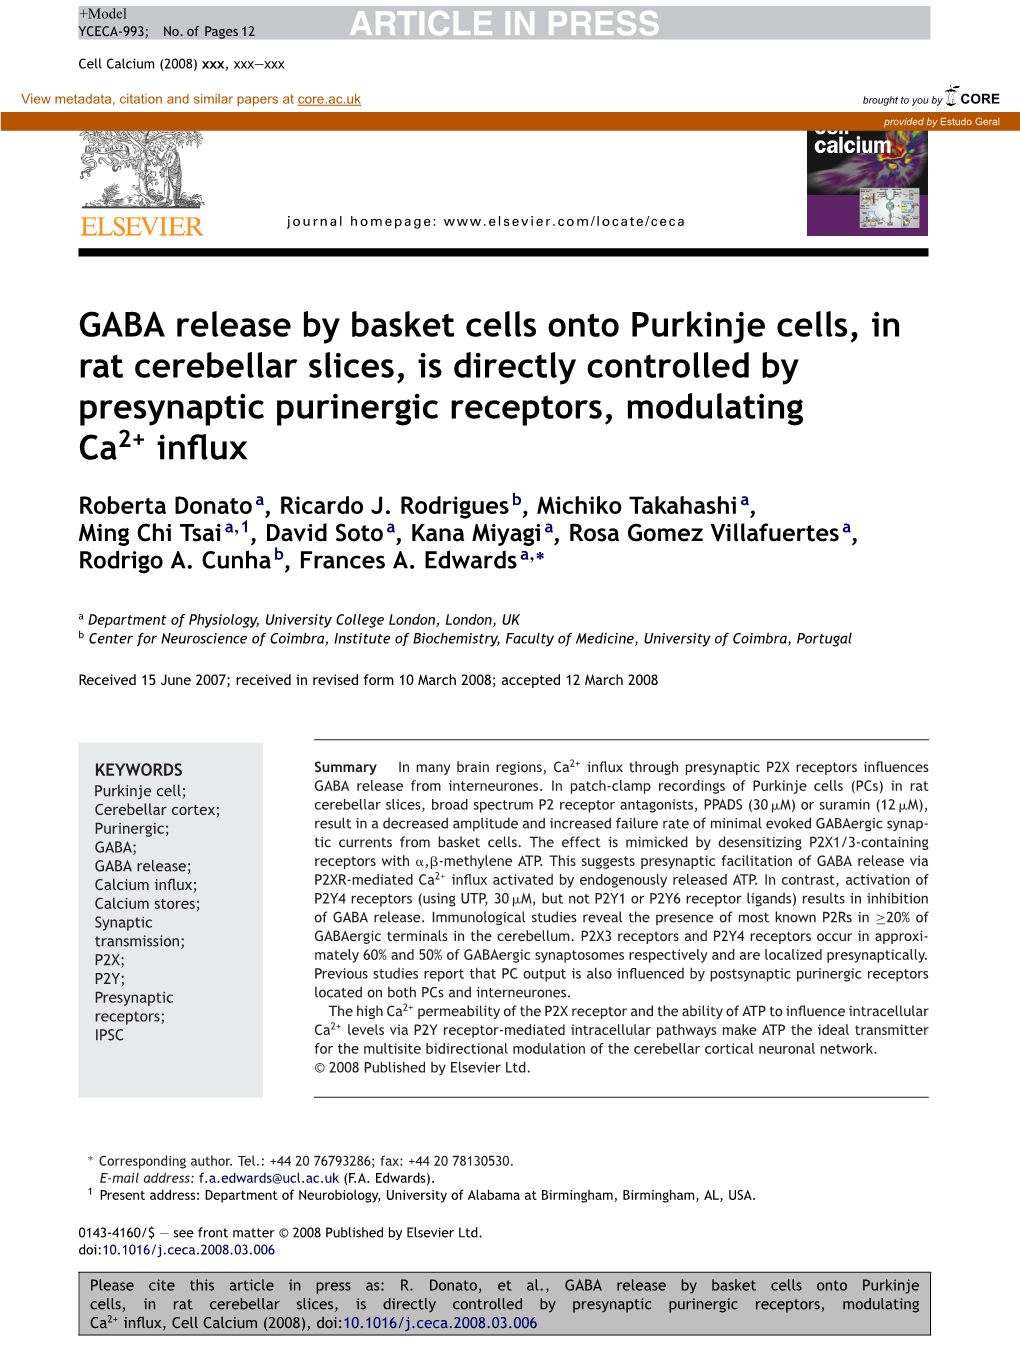 ARTICLE in PRESS GABA Release by Basket Cells Onto Purkinje Cells, in Rat Cerebellar Slices, Is Directly Controlled by Presynapt